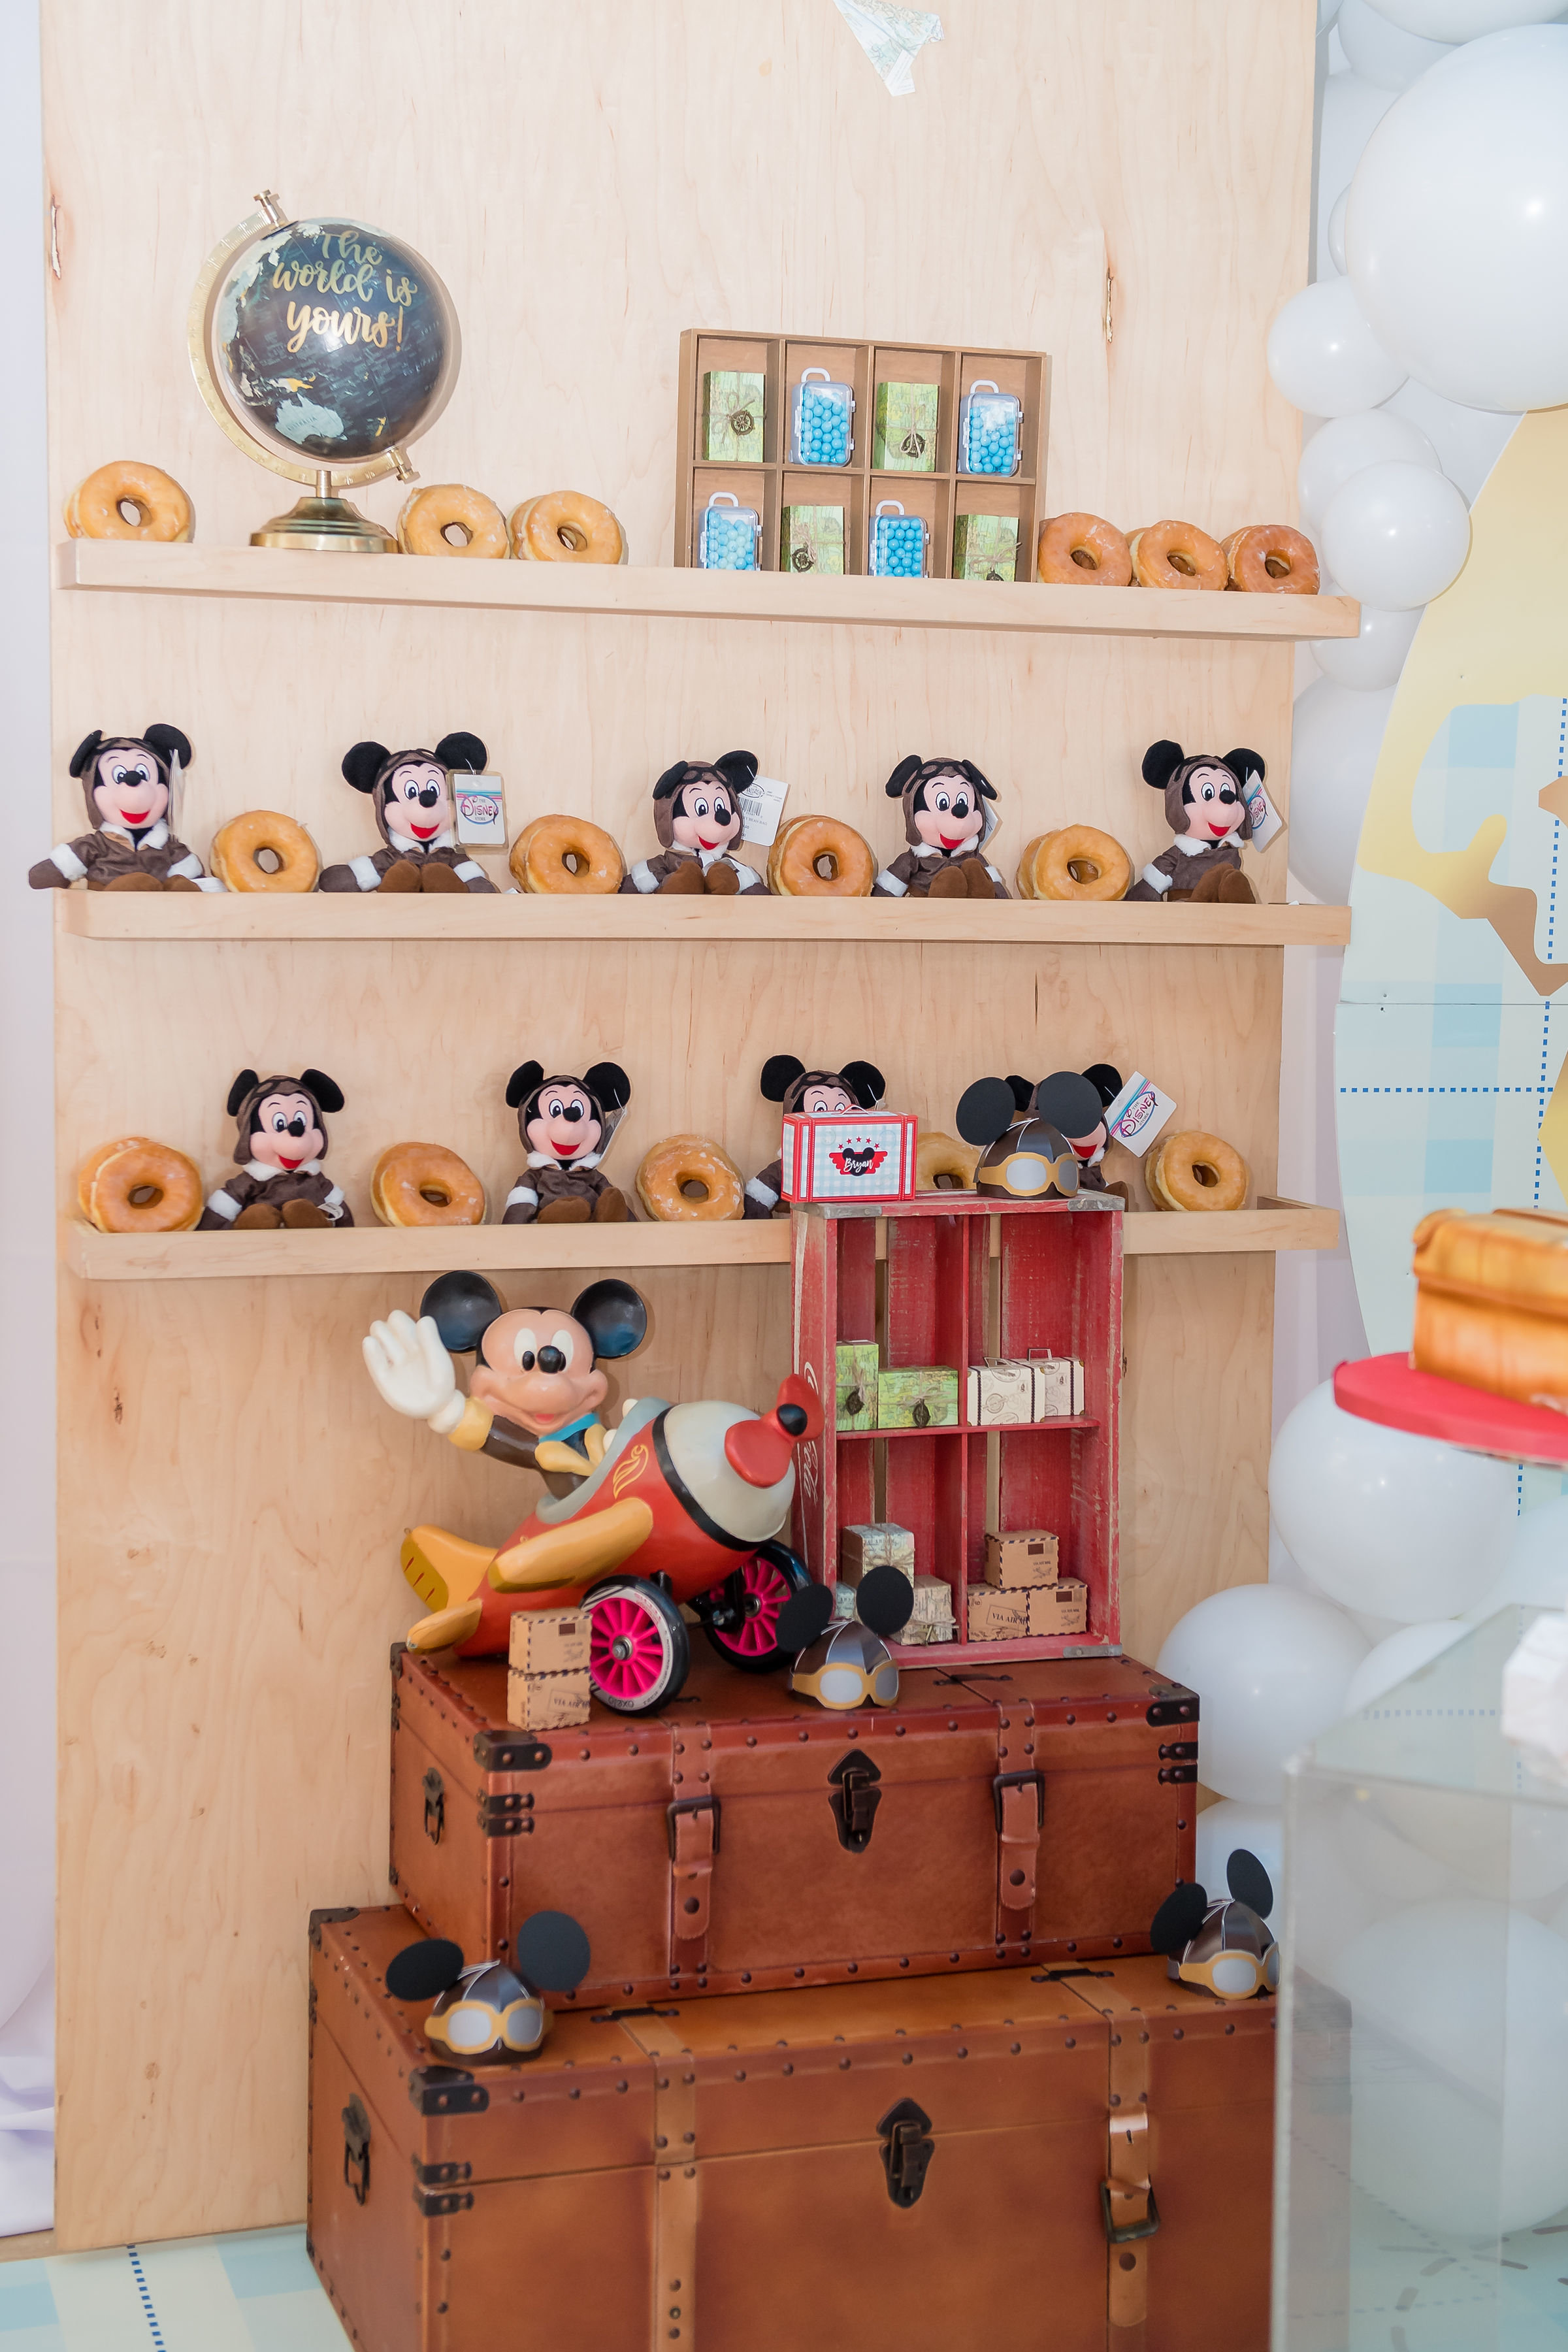 miami-event-planner-one-inspired-party-Mickey-Aviator-19